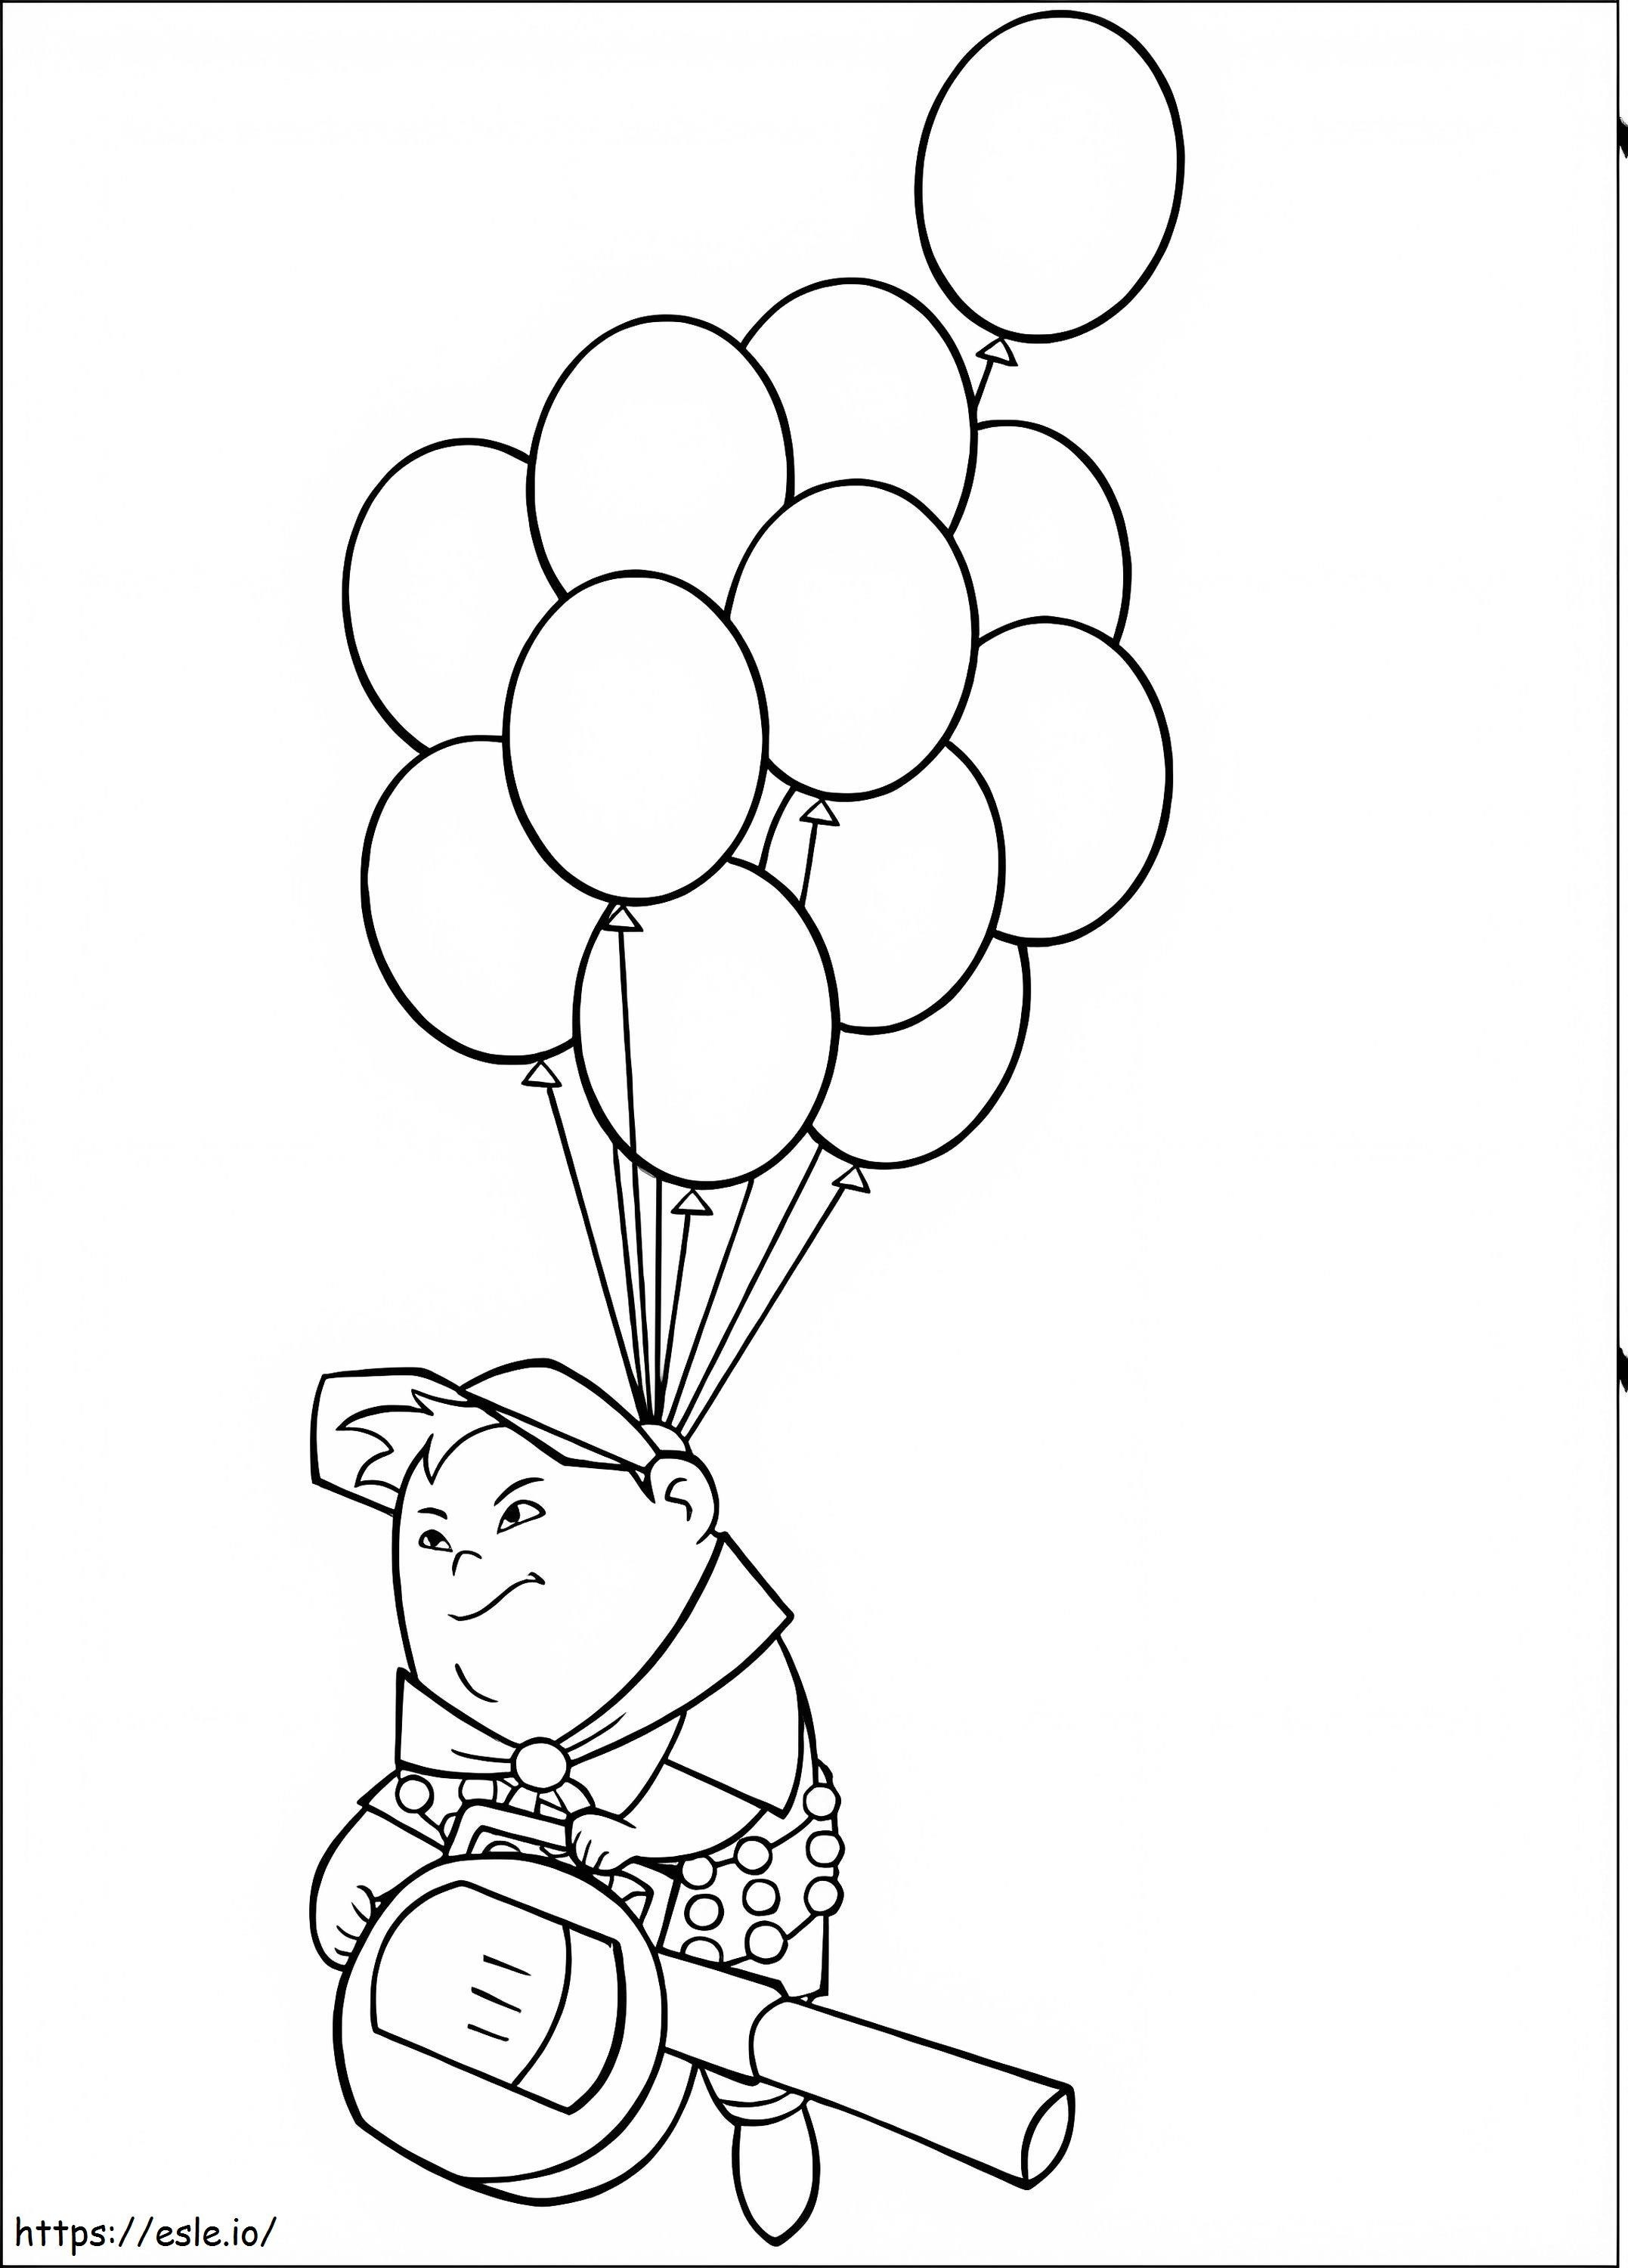 Russell Flying In A Balloon coloring page